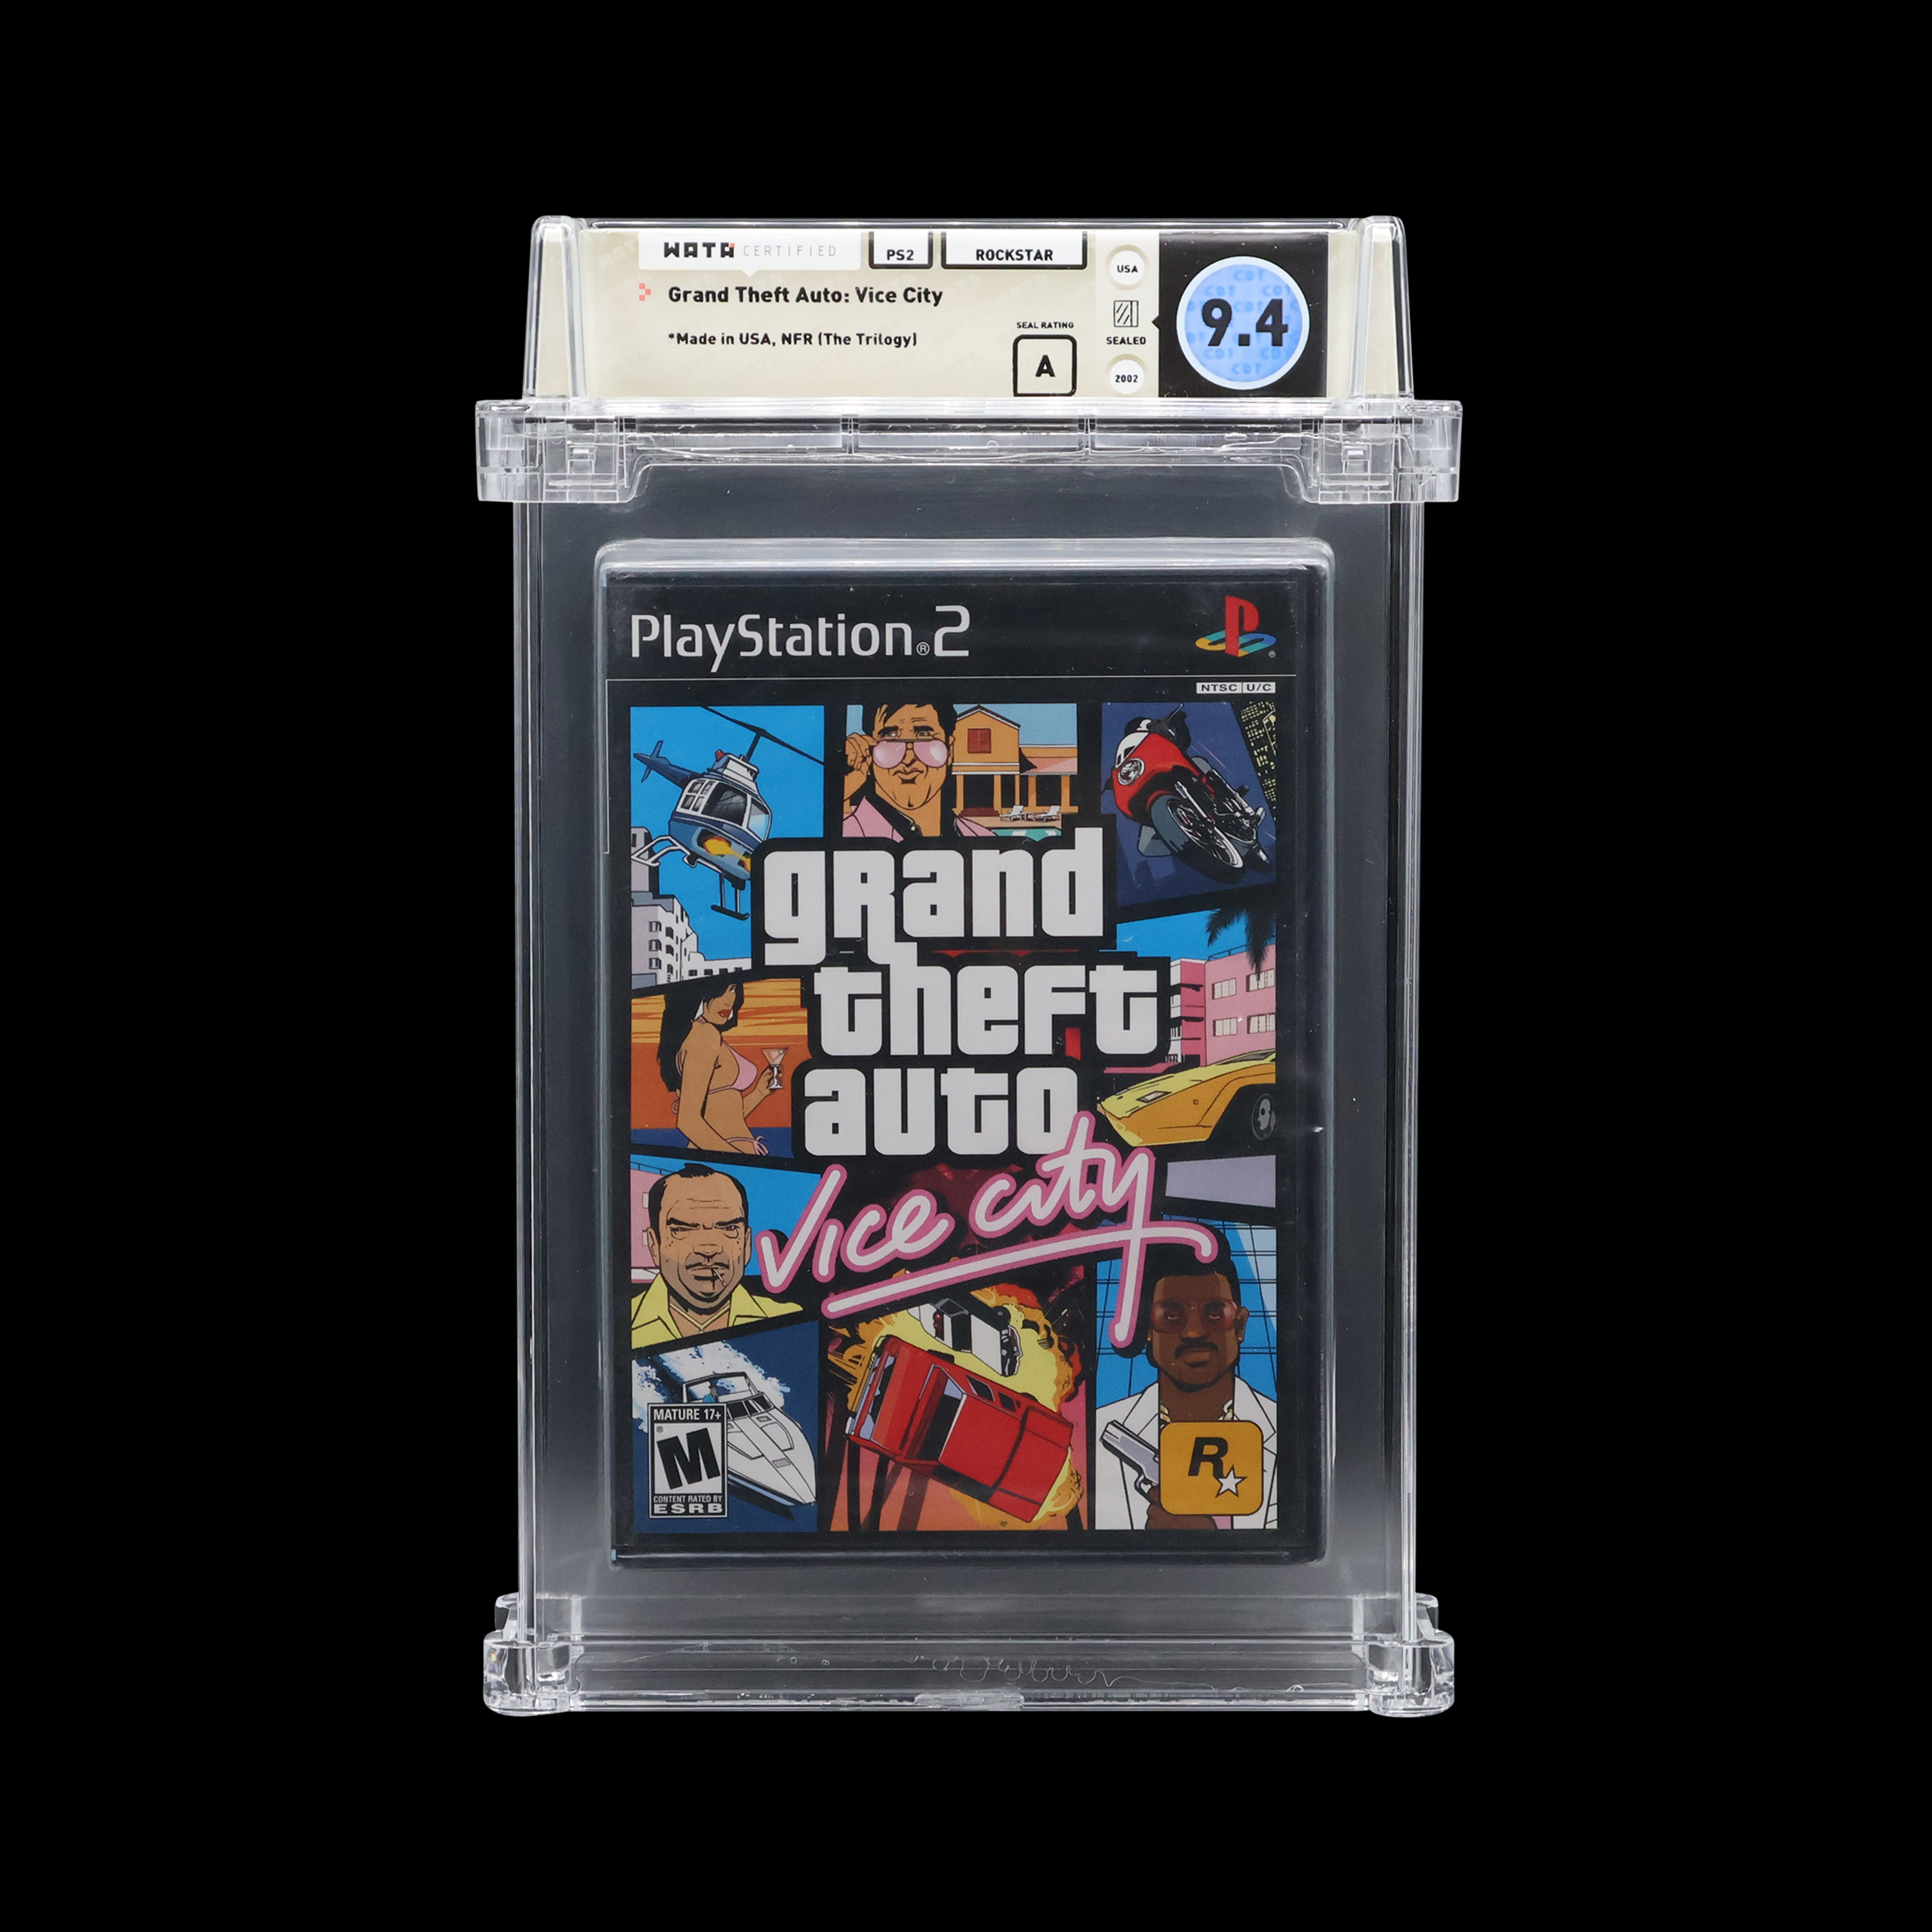 Collectors sealed copy of PlayStation 2s Grand Theft Auto: Vice City with a 9.4 grade.